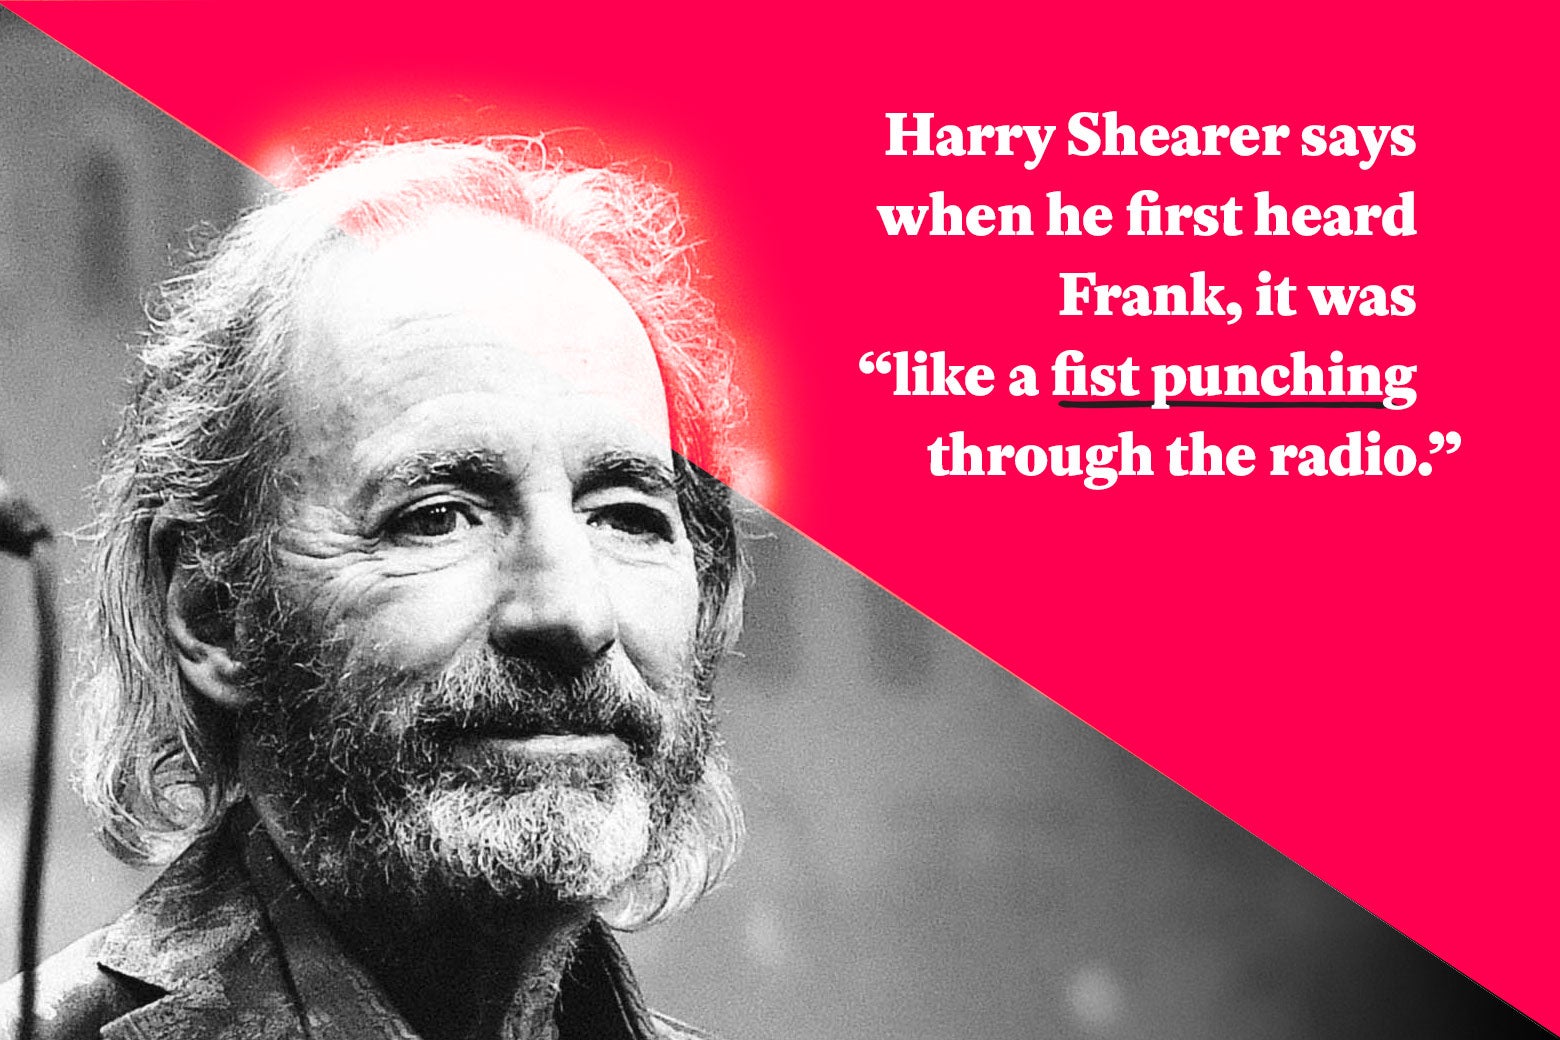 Harry Shearer says when he first heard Frank, it was “like a fist punching through the radio.”